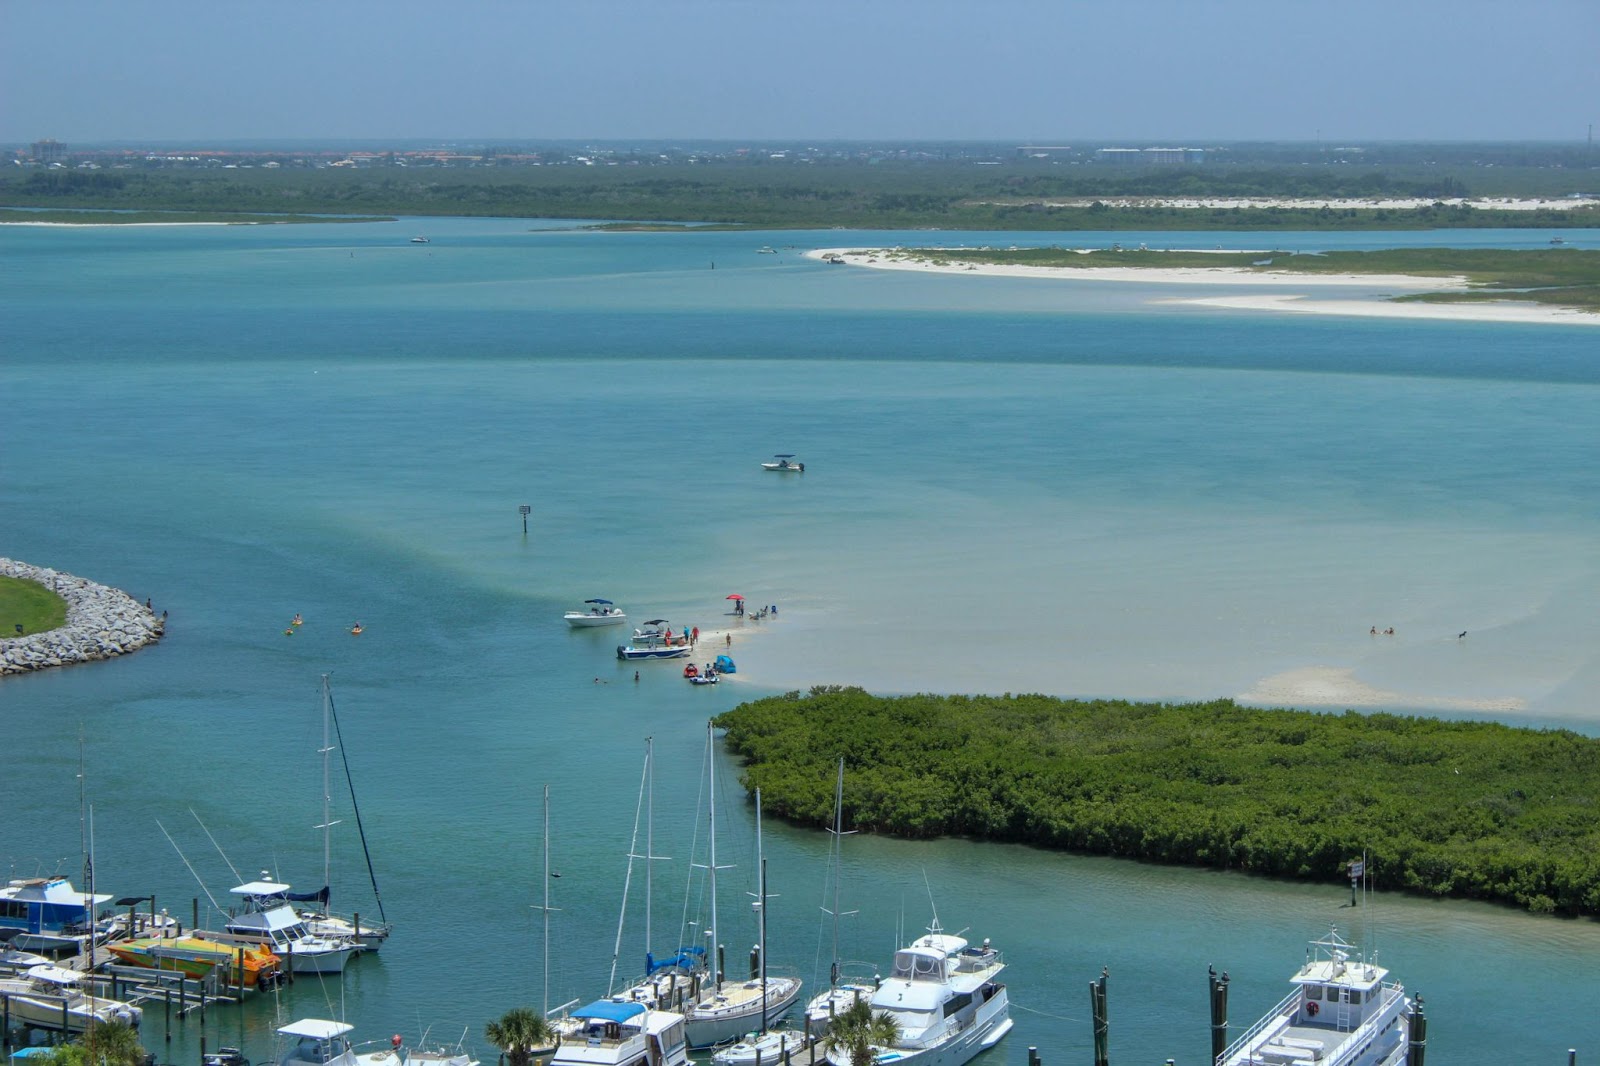 Sport fishing is popular in the Florida Keys. 
pictured: boats in Florida